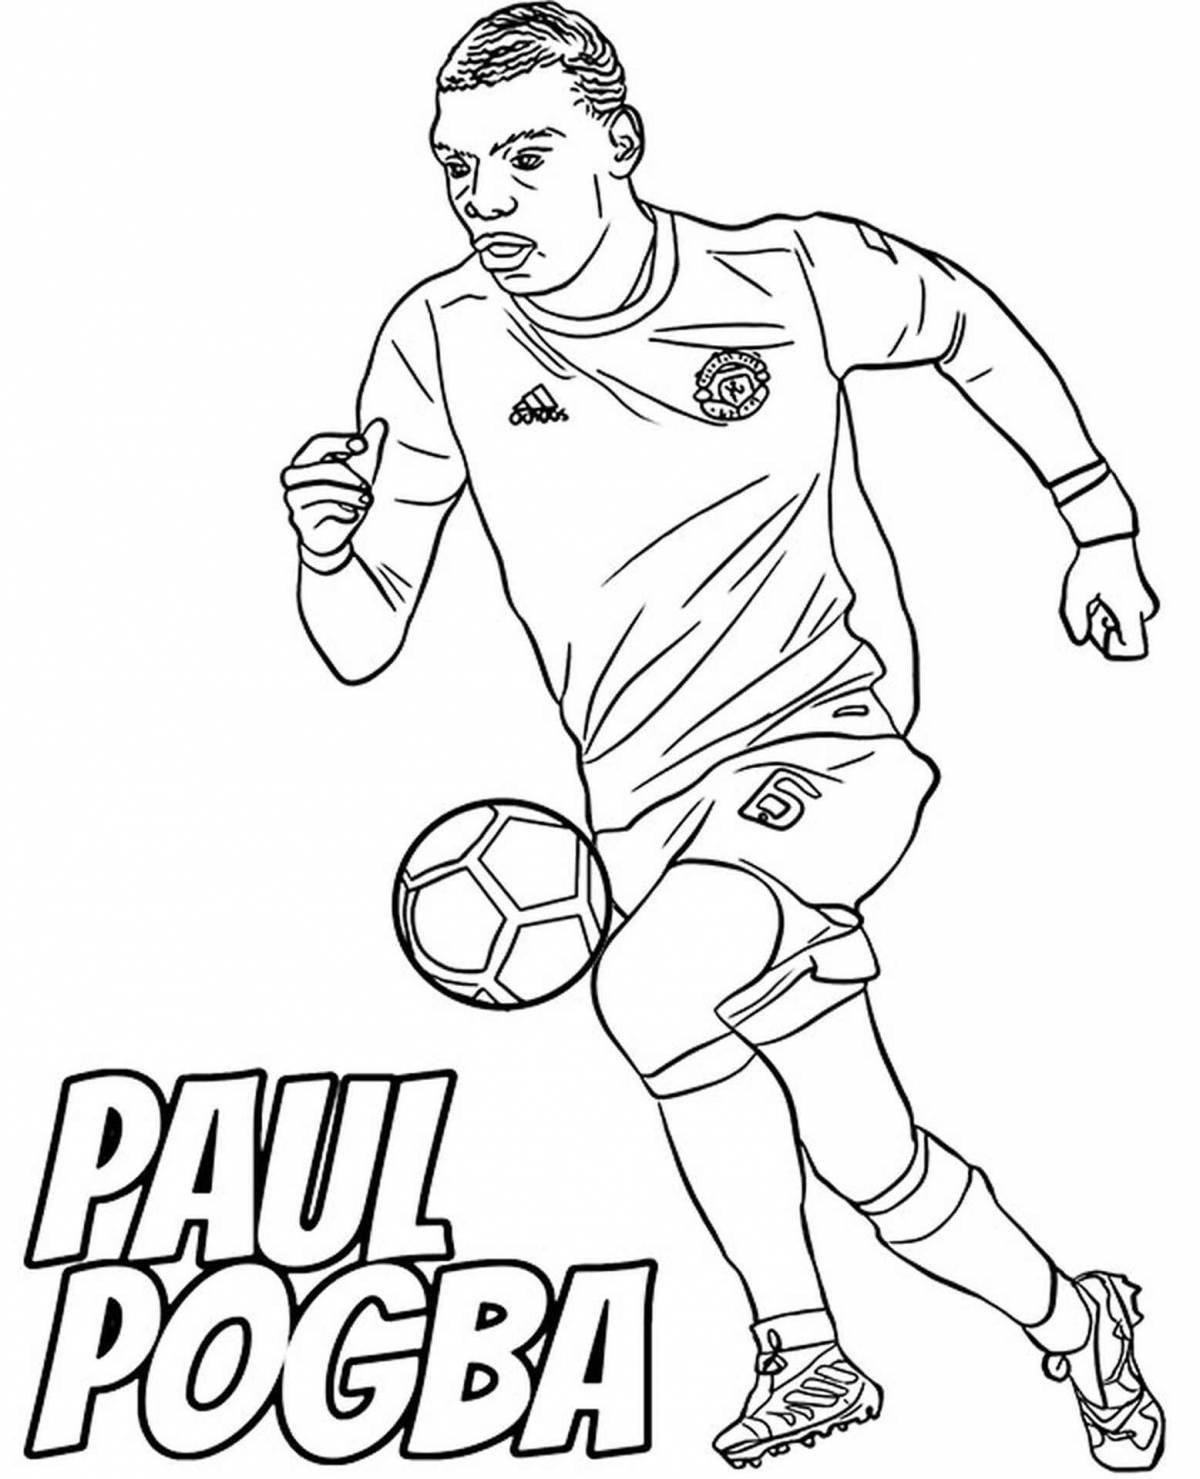 Coloring page strong football players